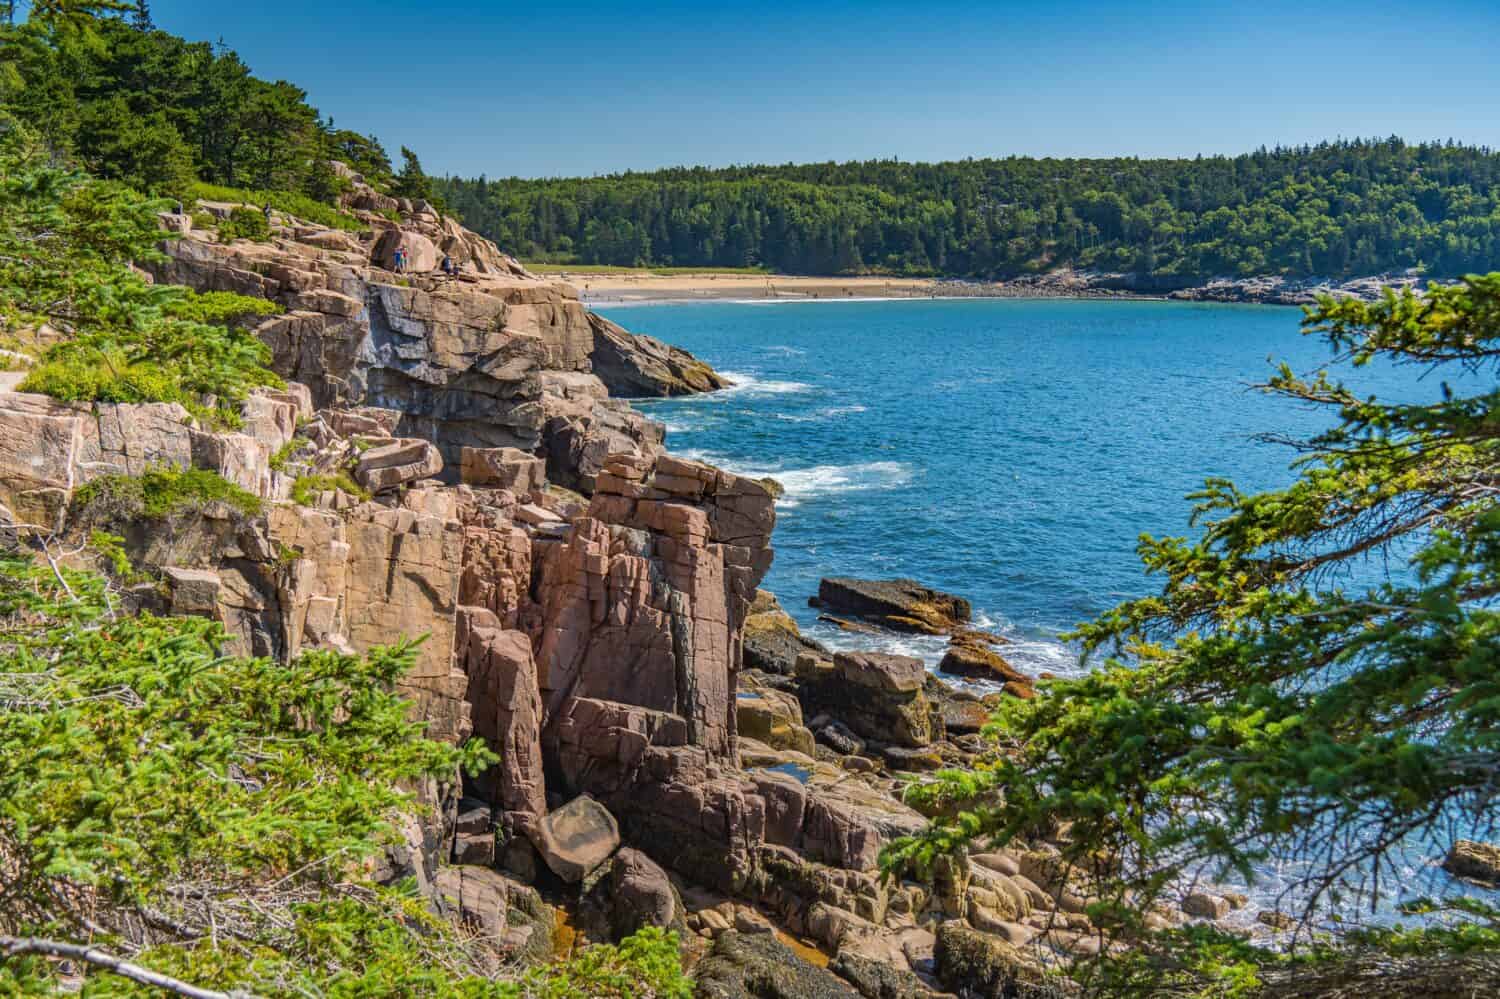 Sand Beach in the distance of rocky coastline at Arcadia National Park in Maine.